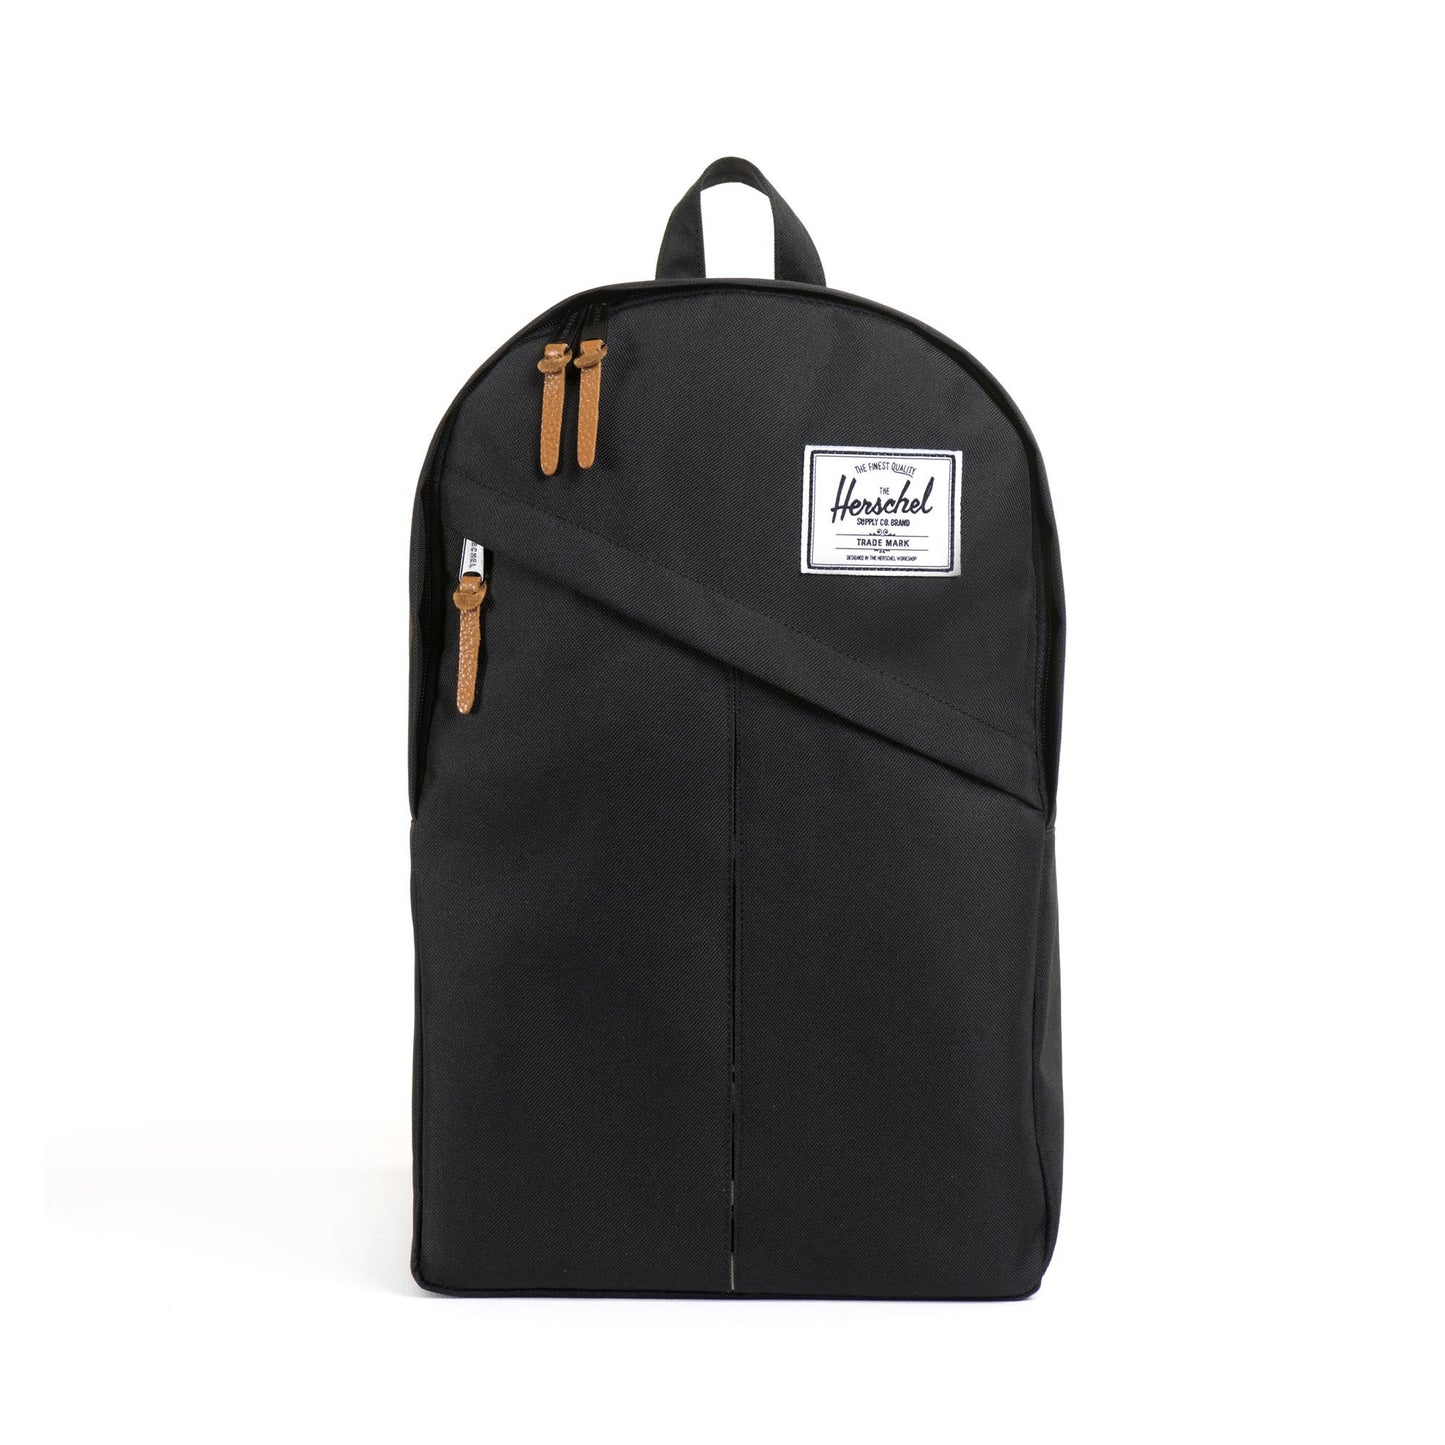 Herschel Supply Co. - Parker Backpack, Black - The Giant Peach